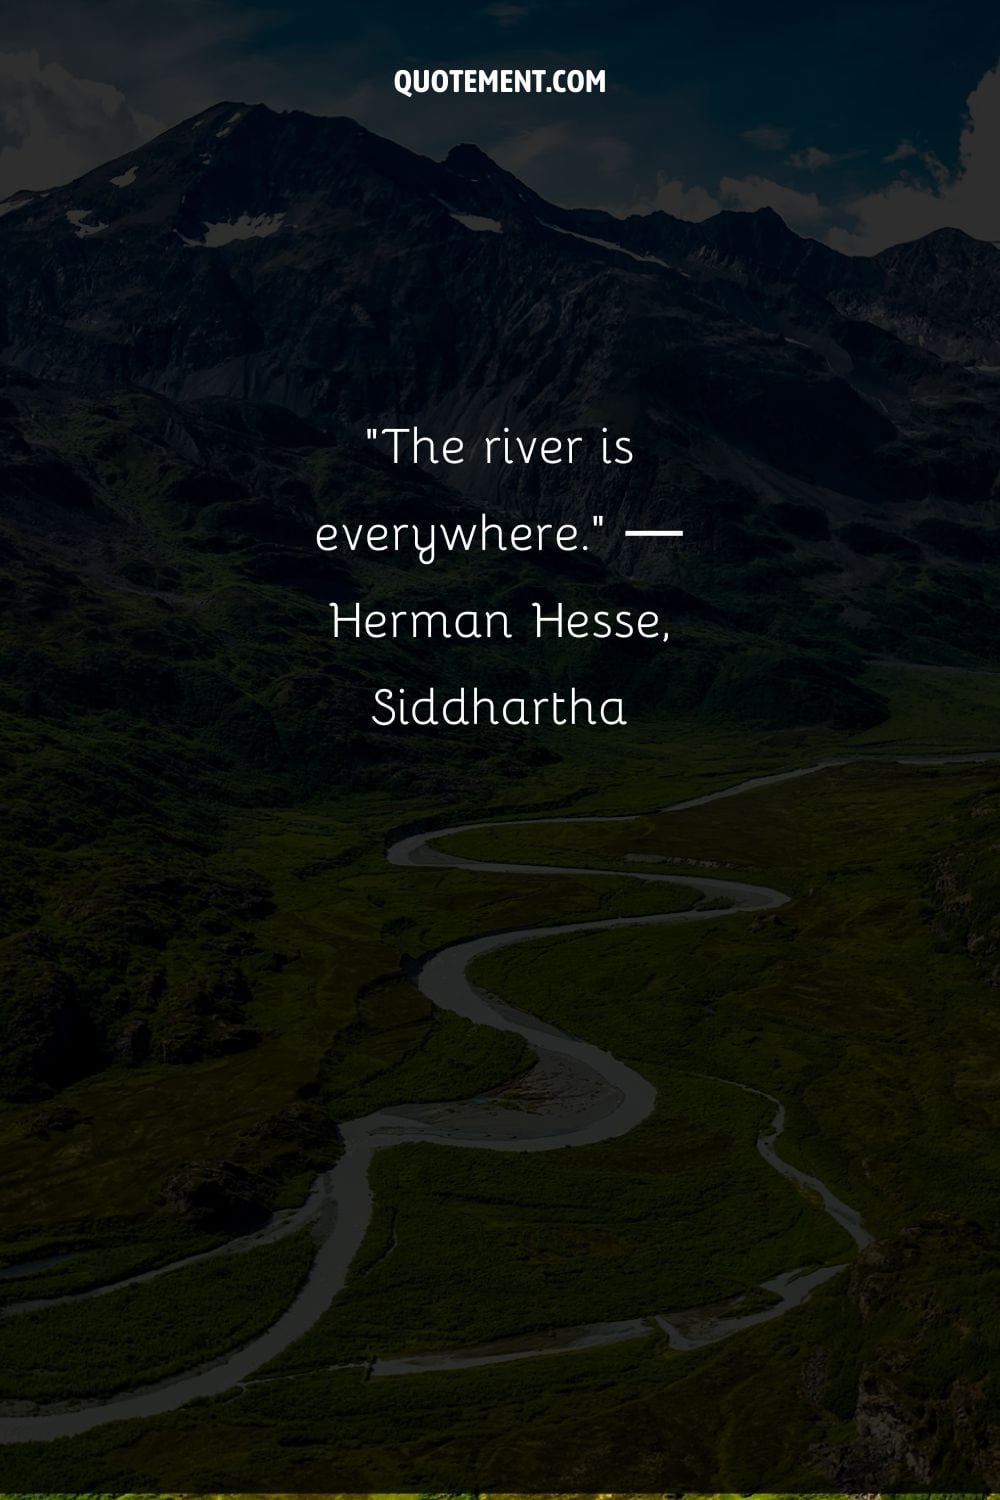 Majestic river embraced by towering mountains representing river nature quote